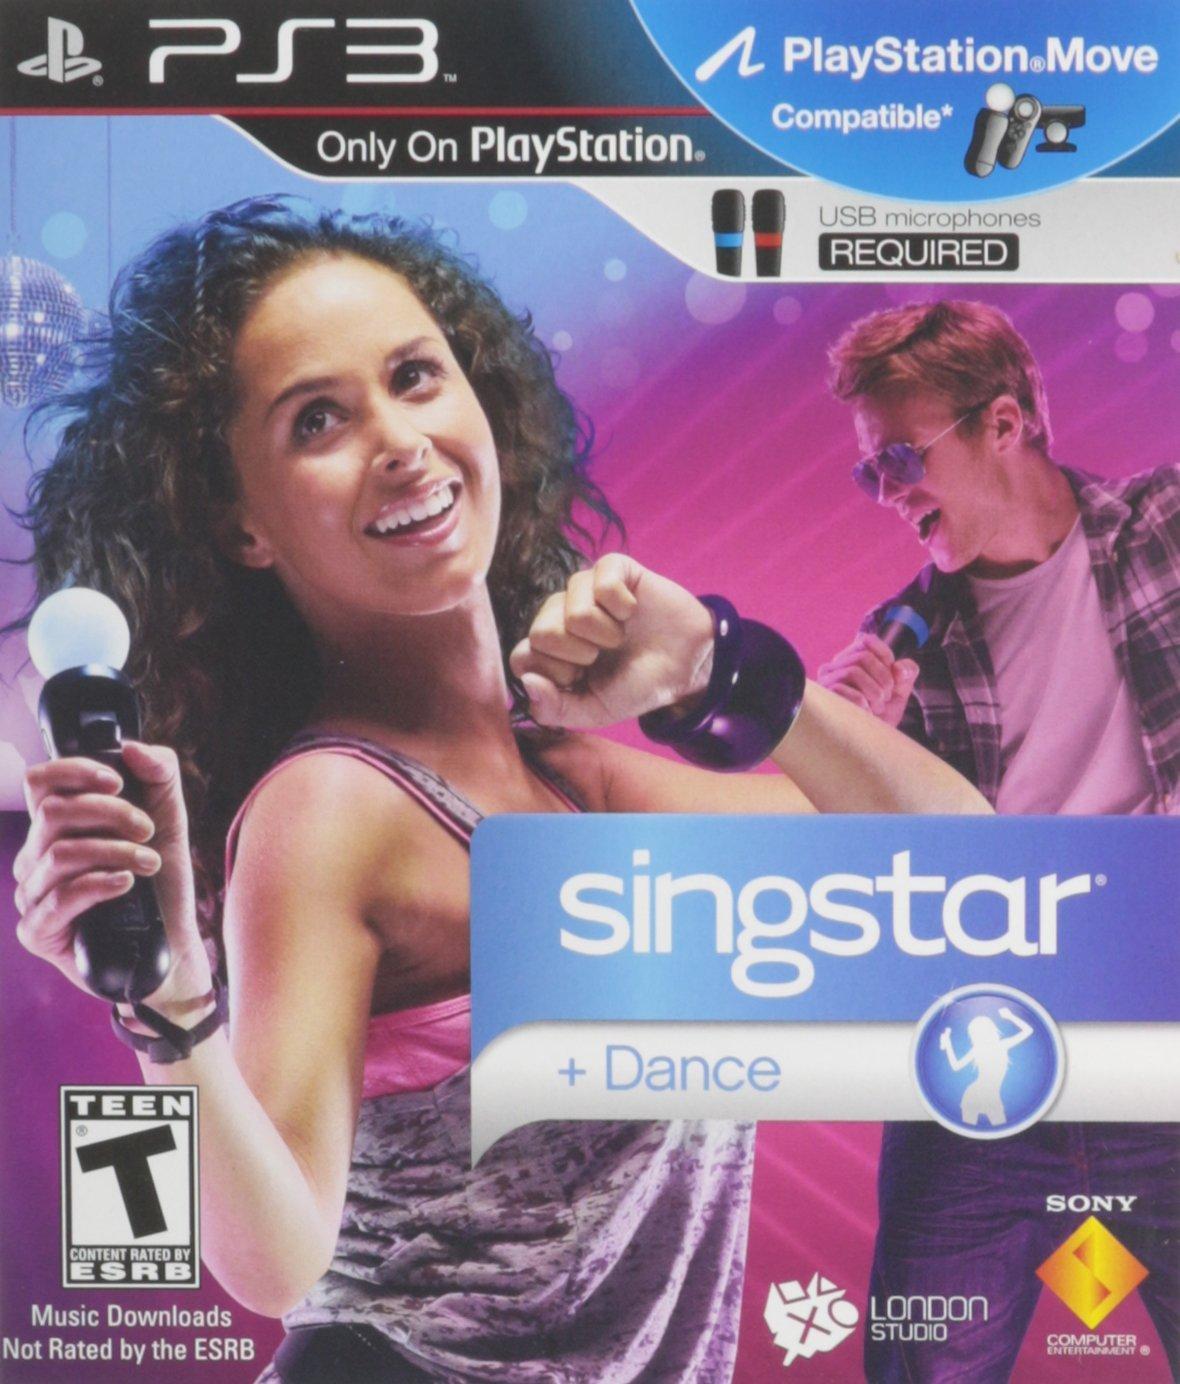 SingStar Legends Stand Alone - PlayStation 2 (Stand Alone)